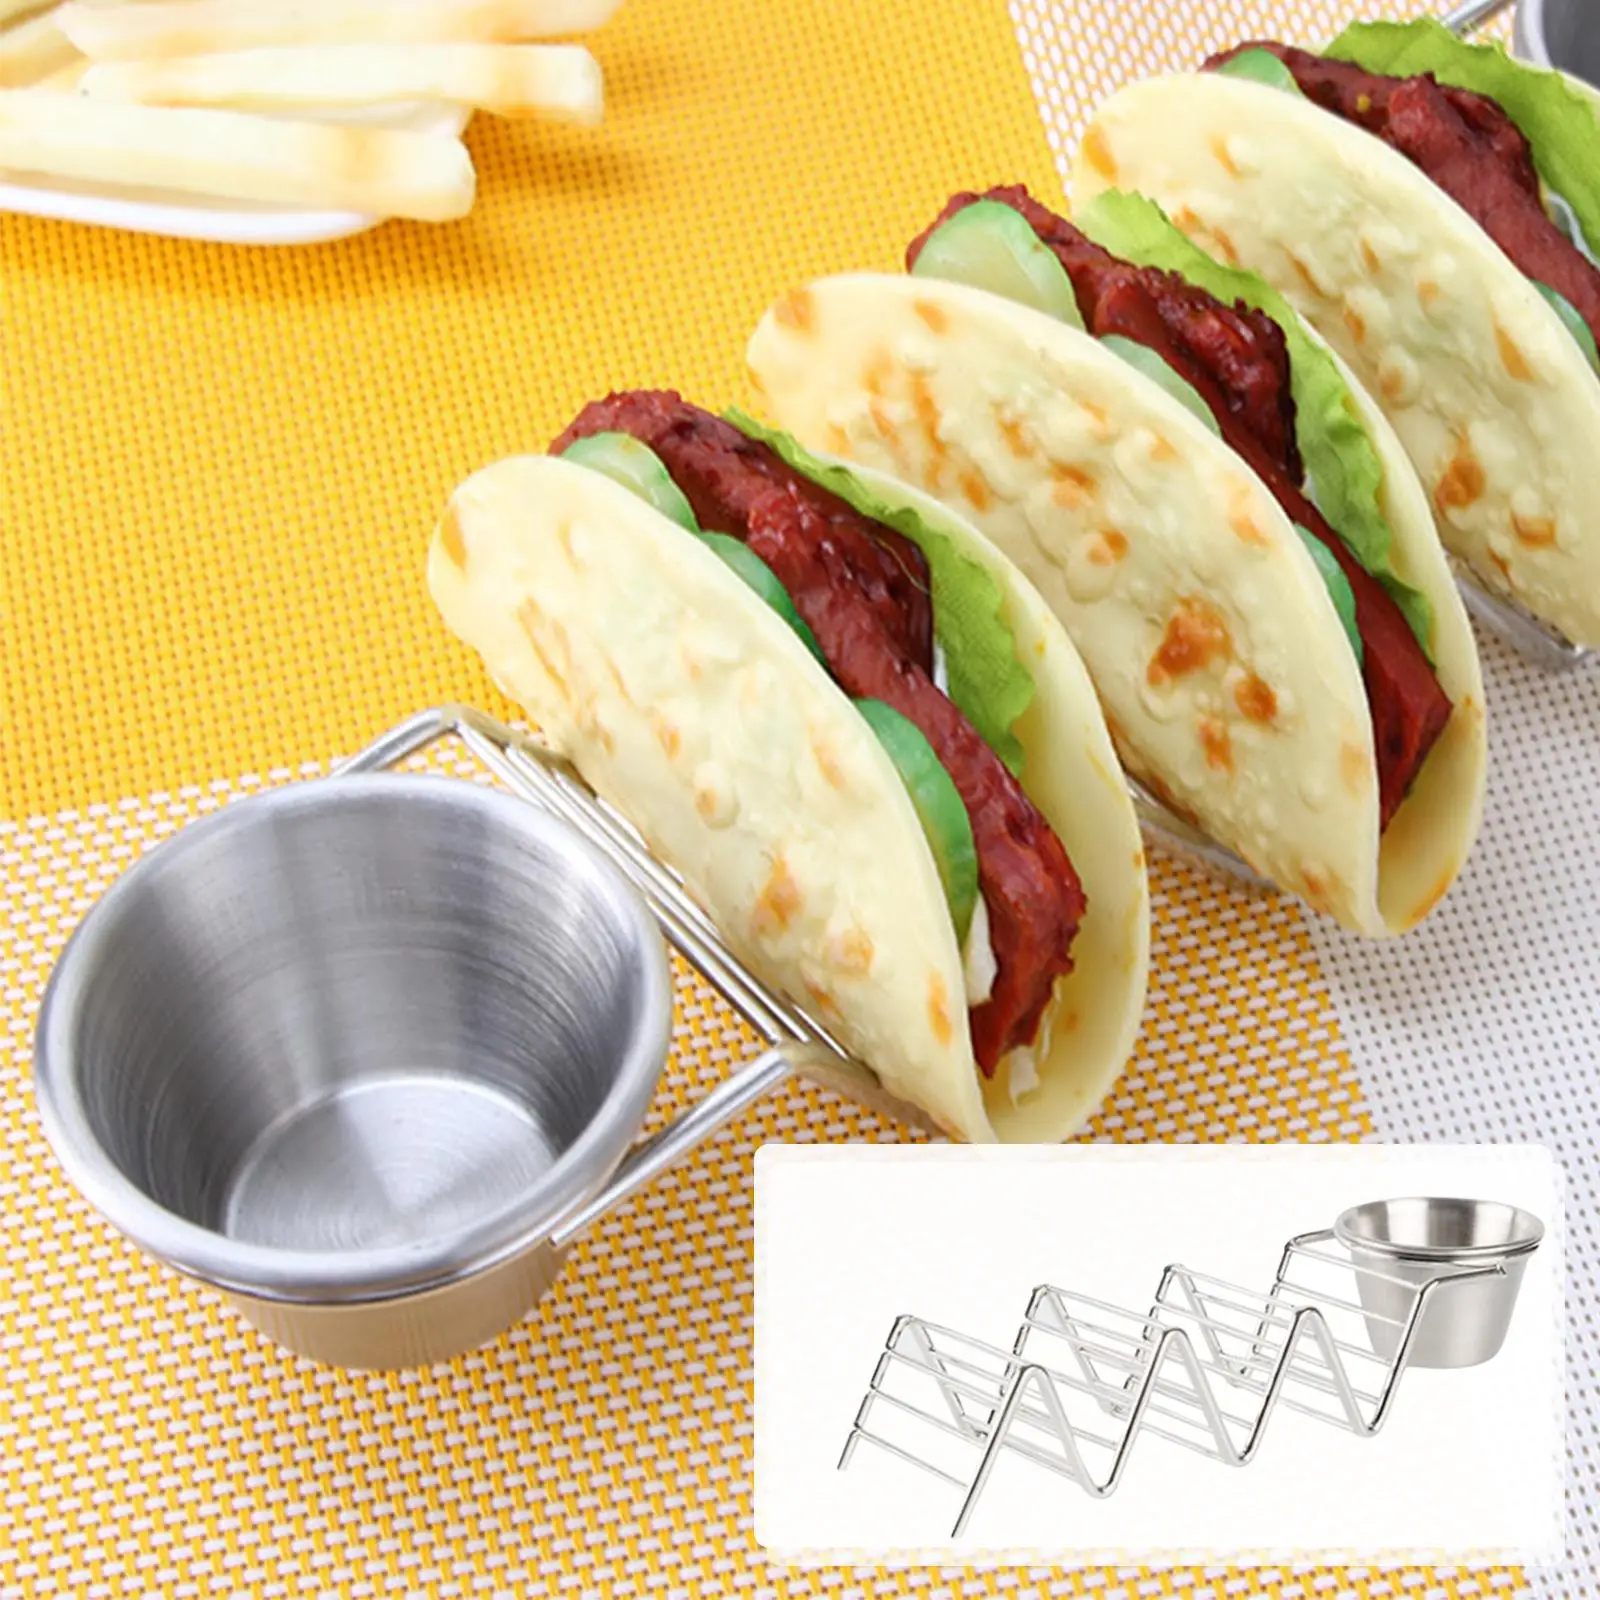  Holder Seasoning Bowl Tray Shape for Oven Grill Mexican Food